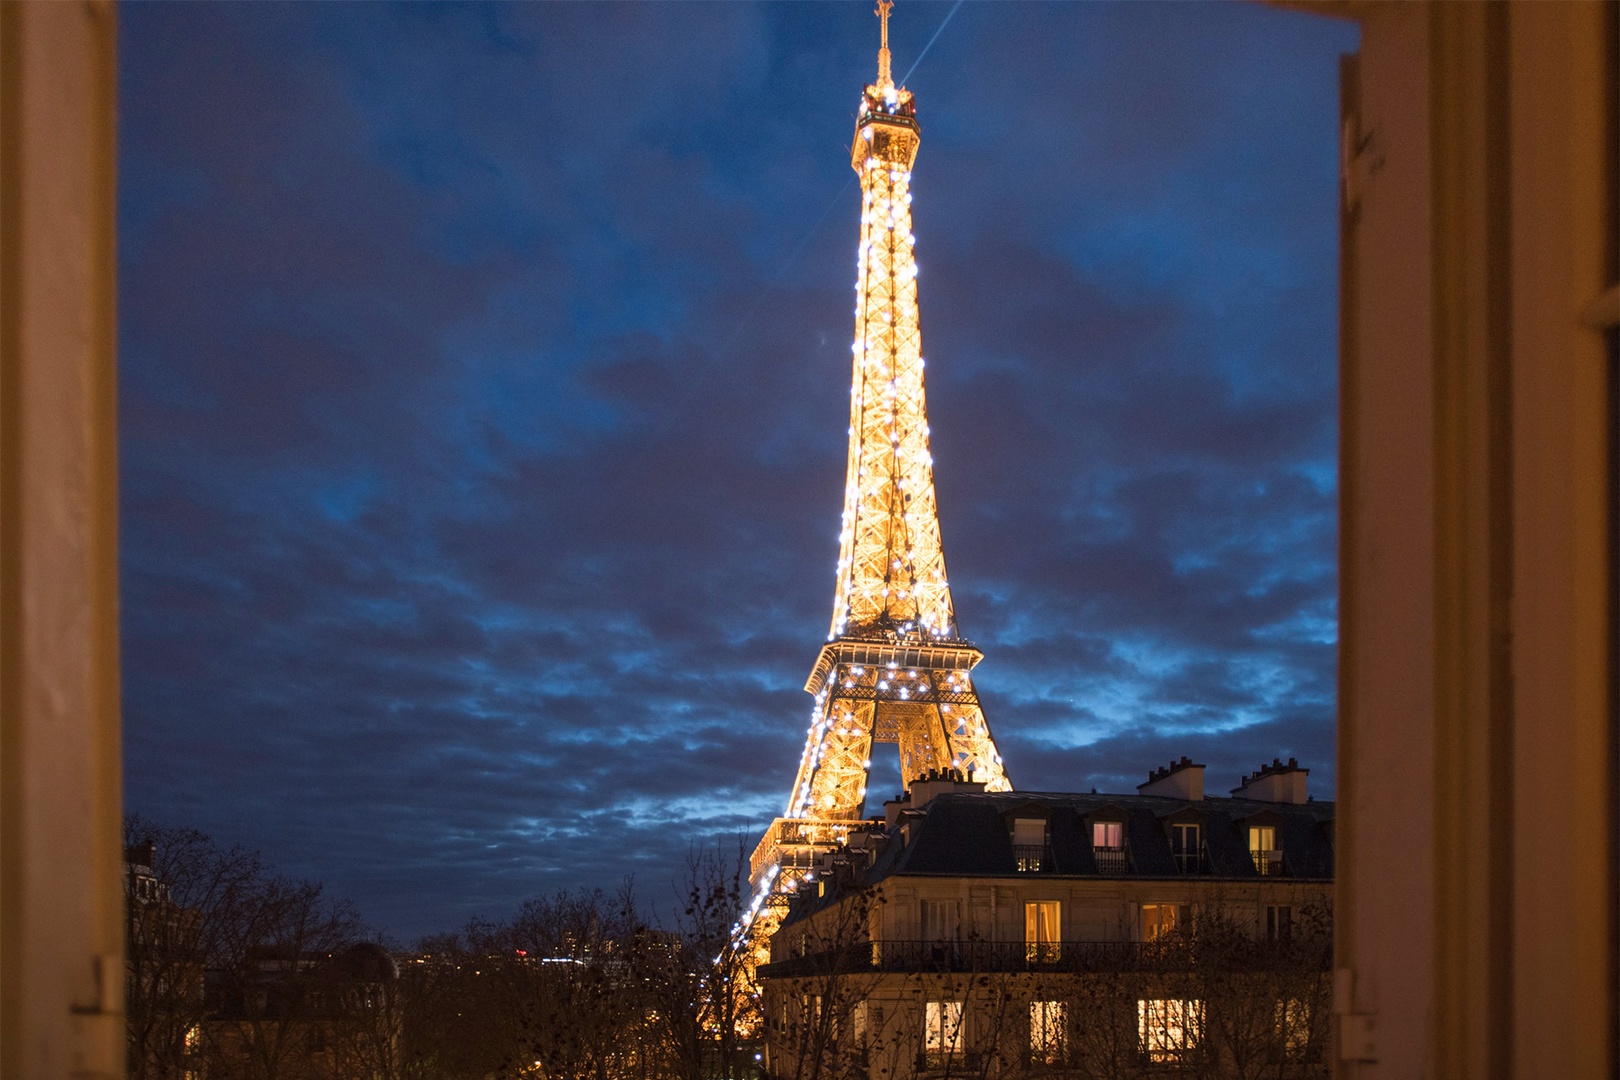 Unbelievable views of the Eiffel Tower to savor every night!